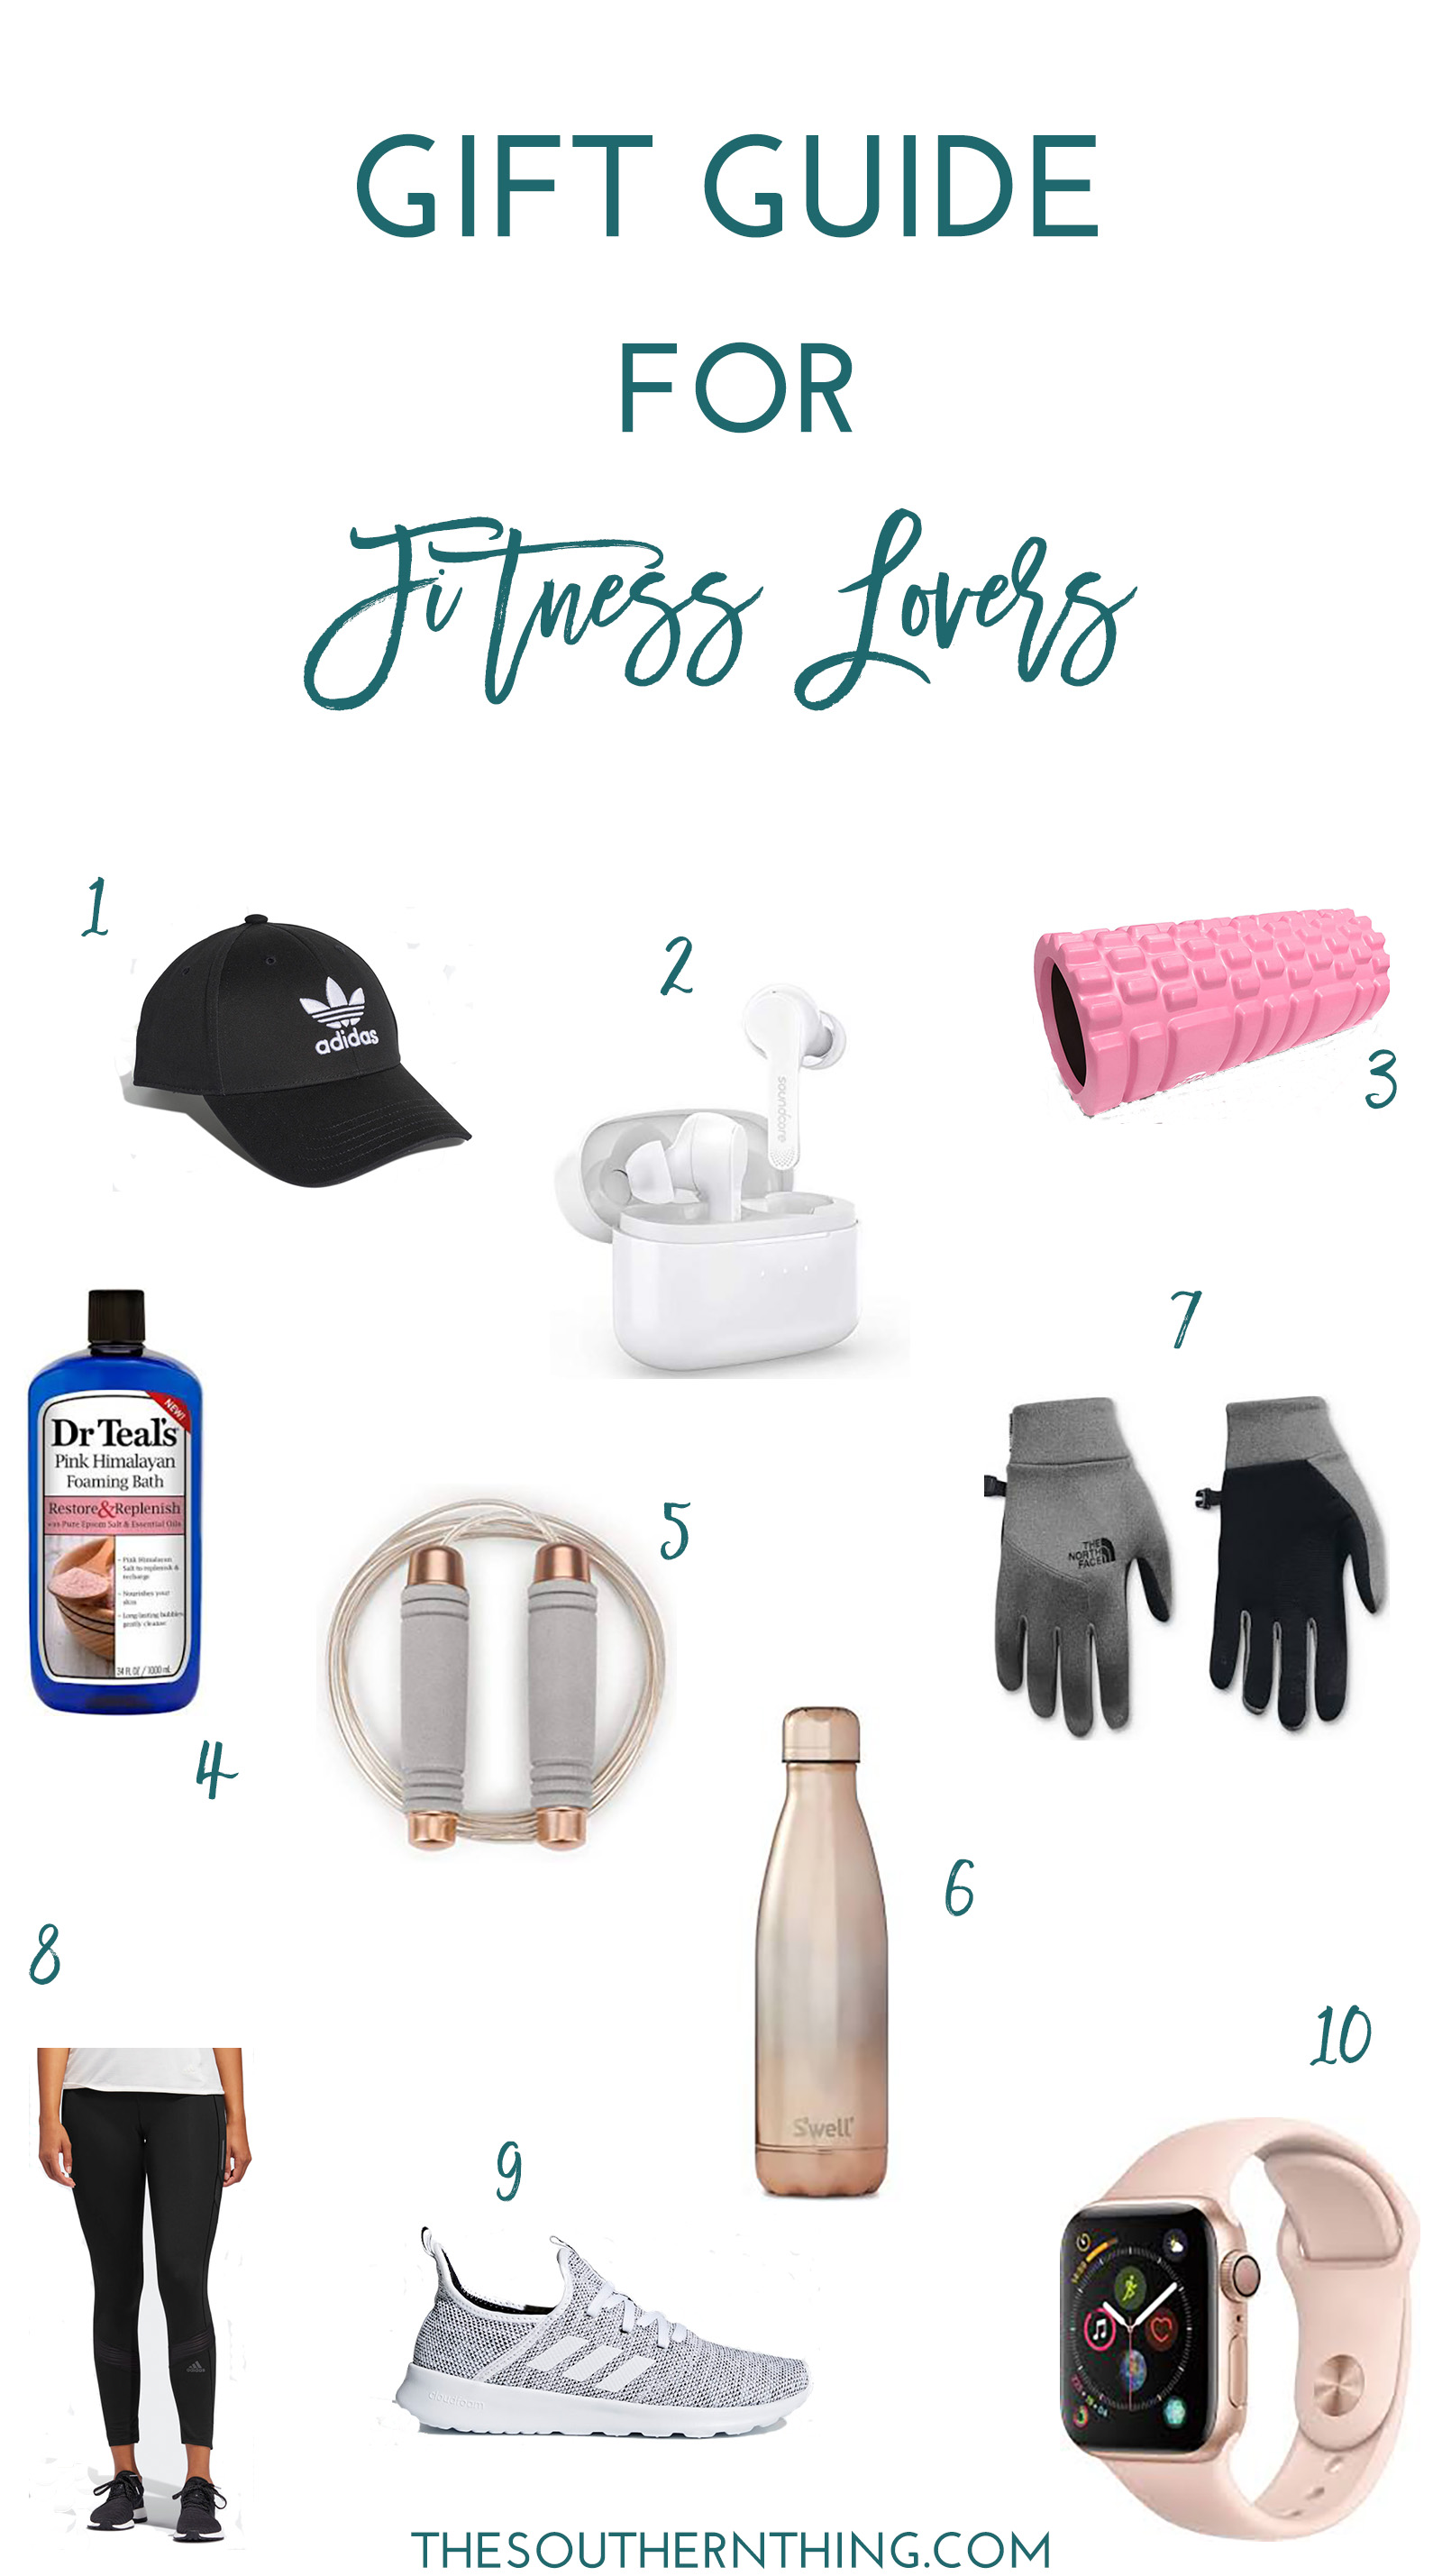 Stocking Stuffer Ideas for the Fitness Junkie